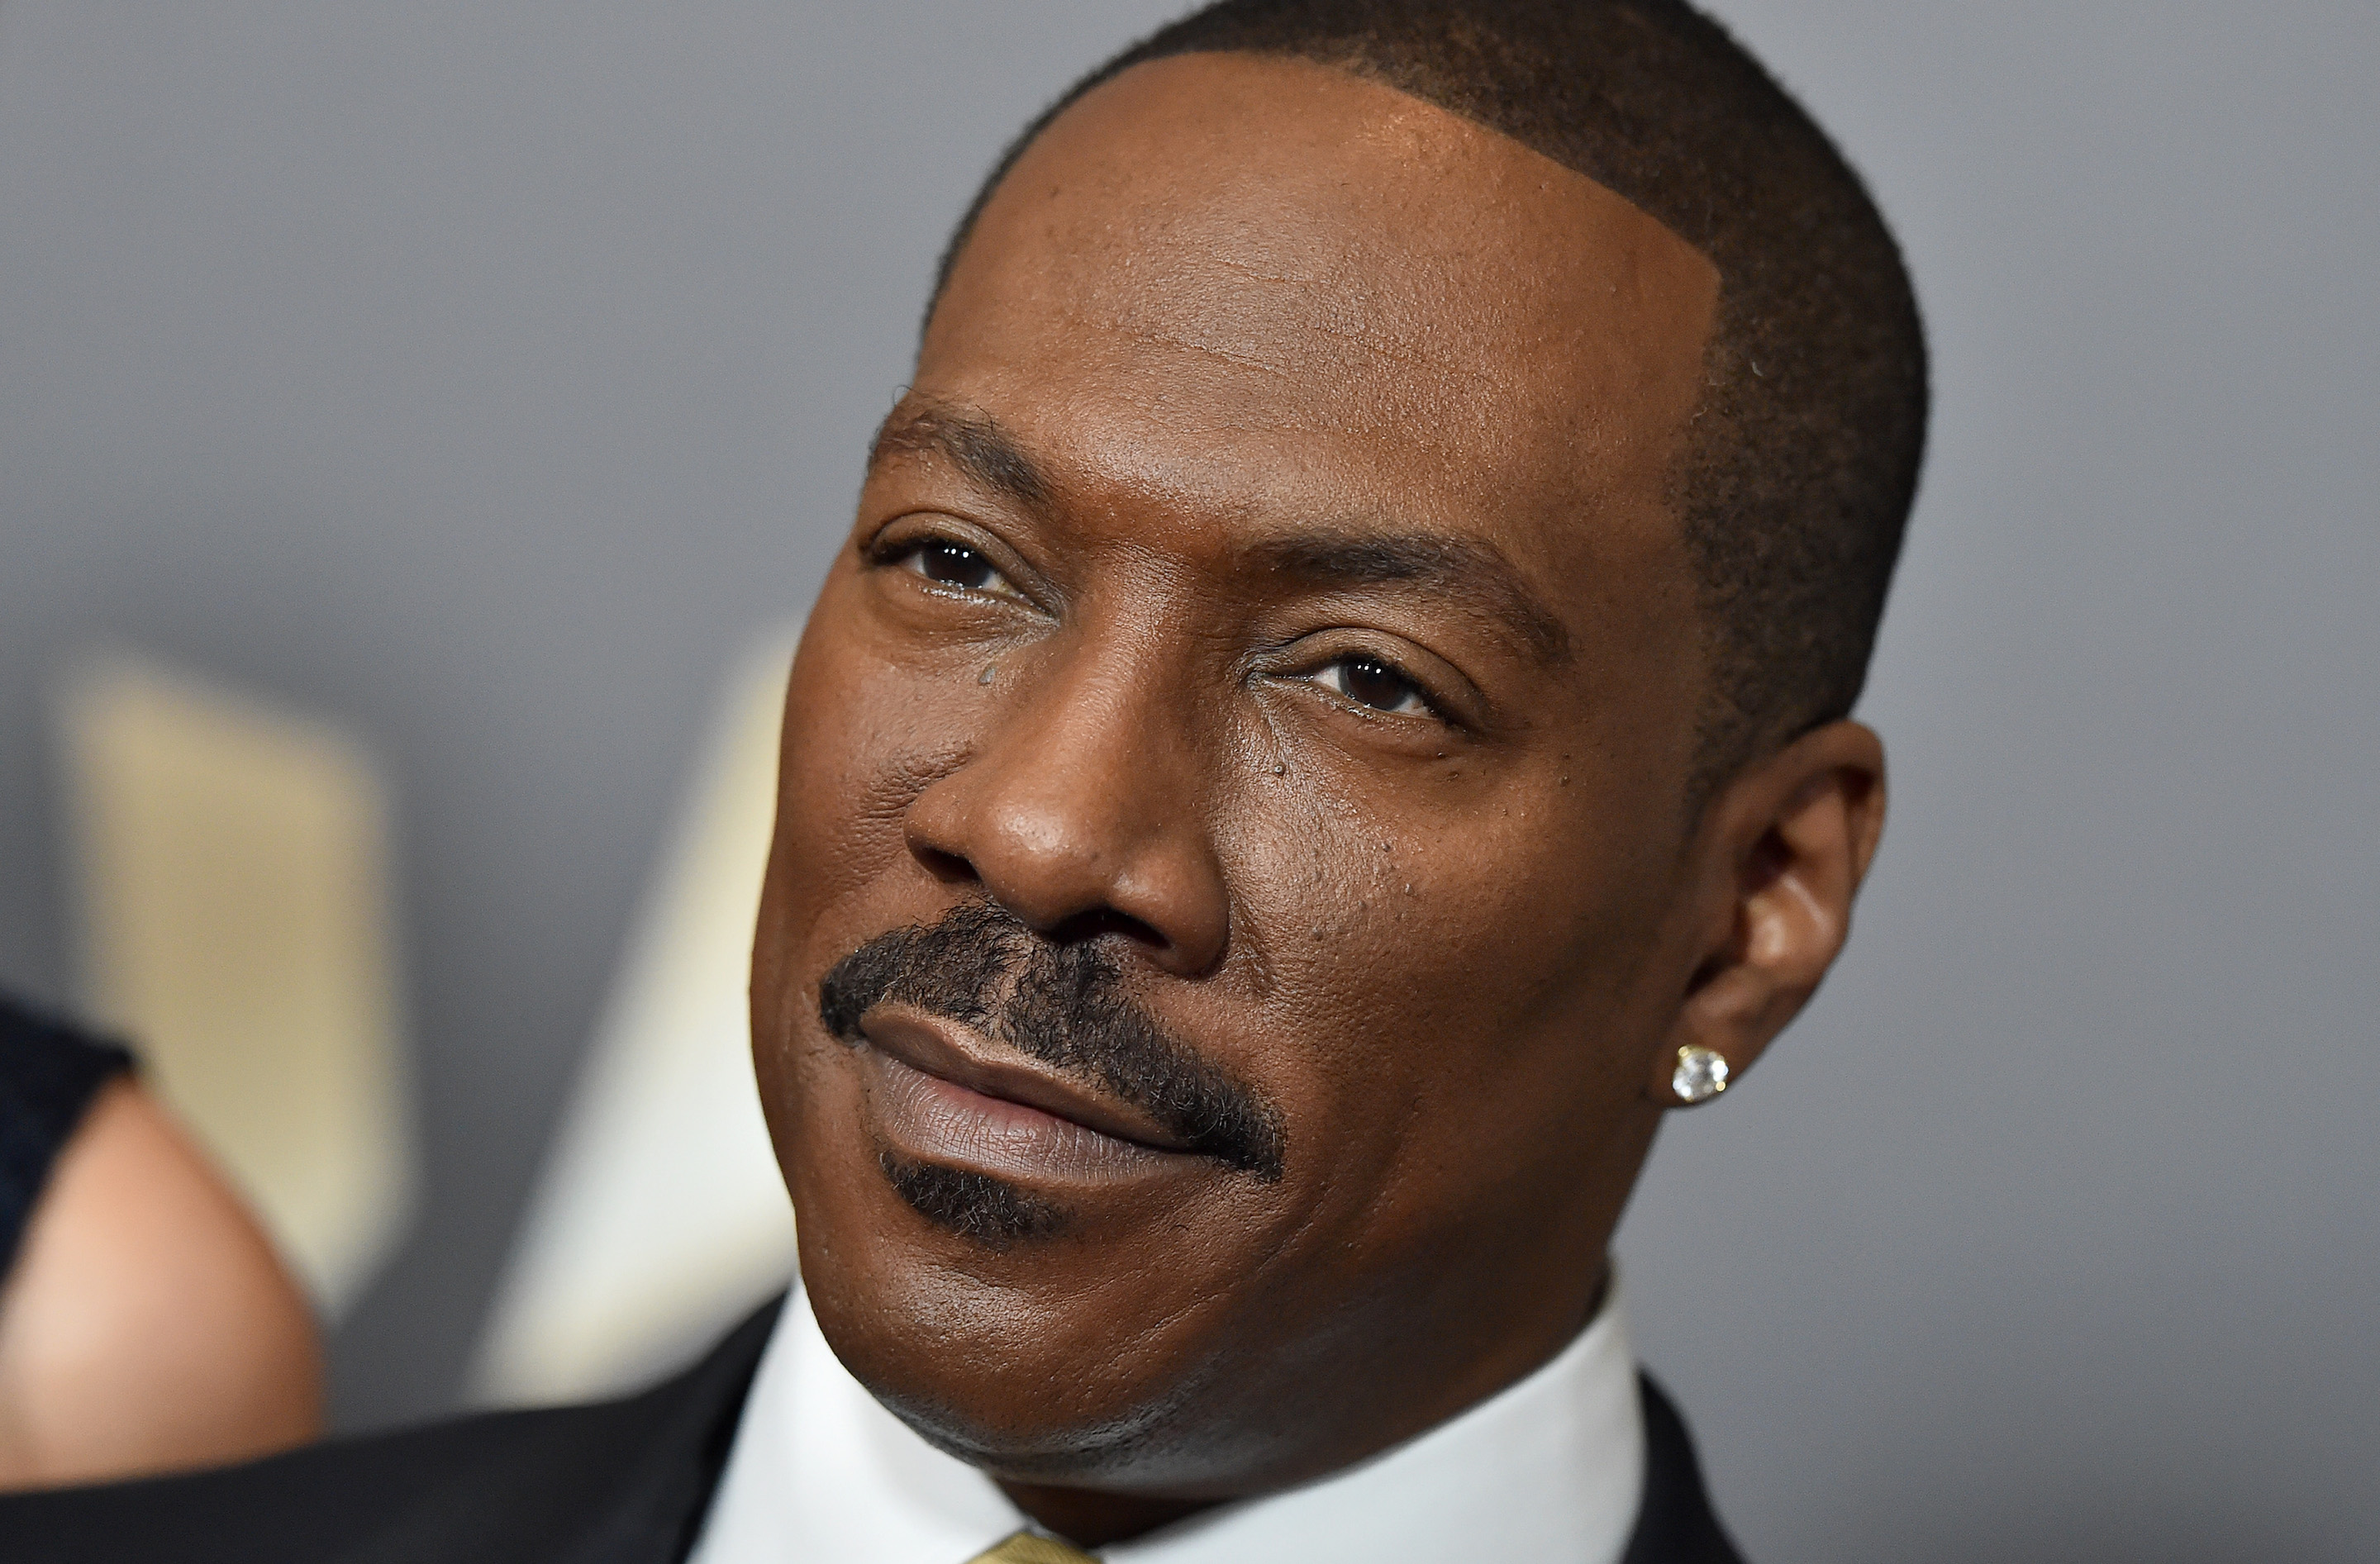 "Eddie Murphy" returning to a place that helped him launch his career: To Host 'SNL' for the first time in 35 years. 9